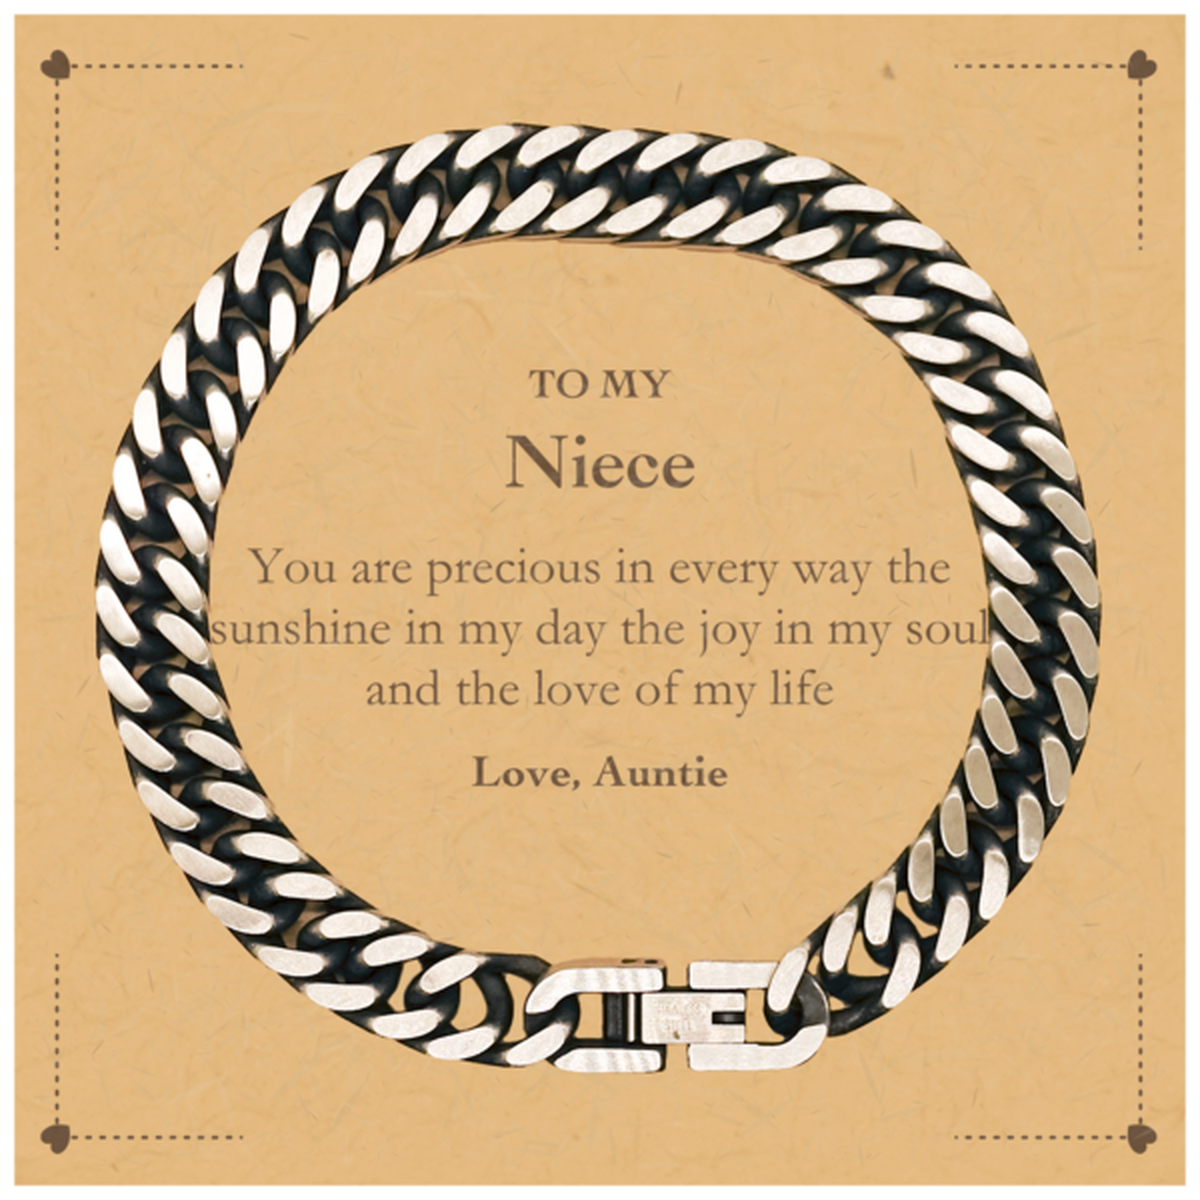 Graduation Gifts for Niece Cuban Link Chain Bracelet Present from Auntie, Christmas Niece Birthday Gifts Niece You are precious in every way the sunshine in my day. Love, Auntie